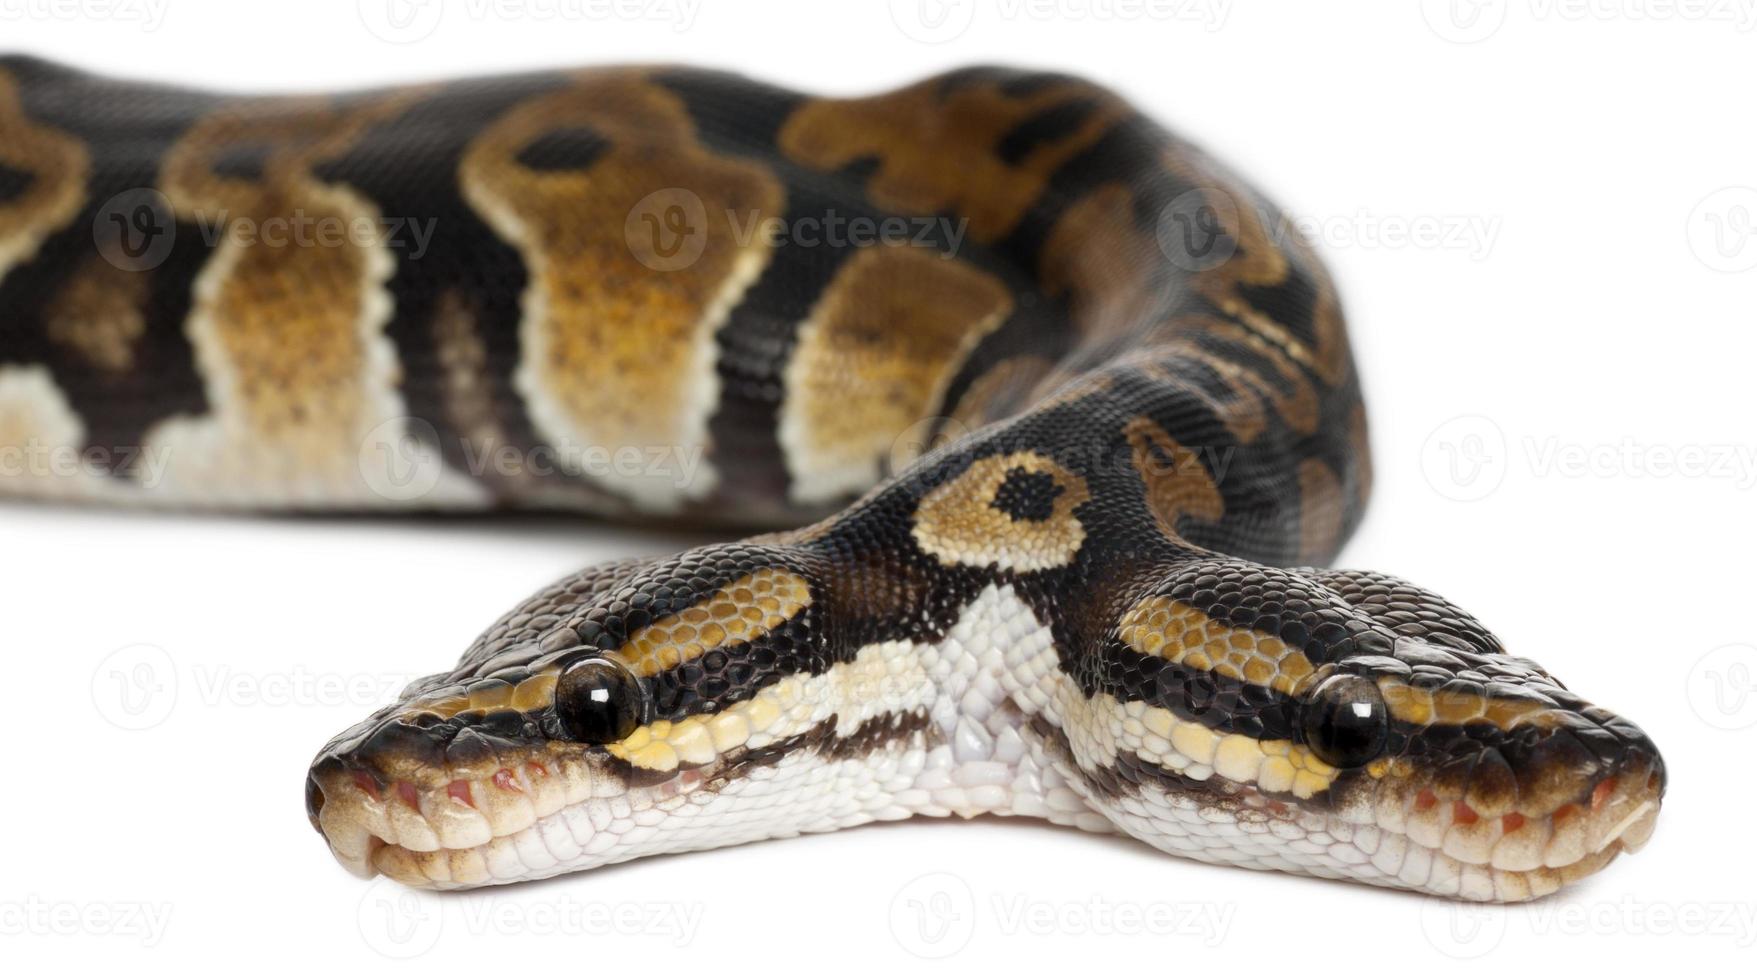 Close-up of Two headed Royal Python photo